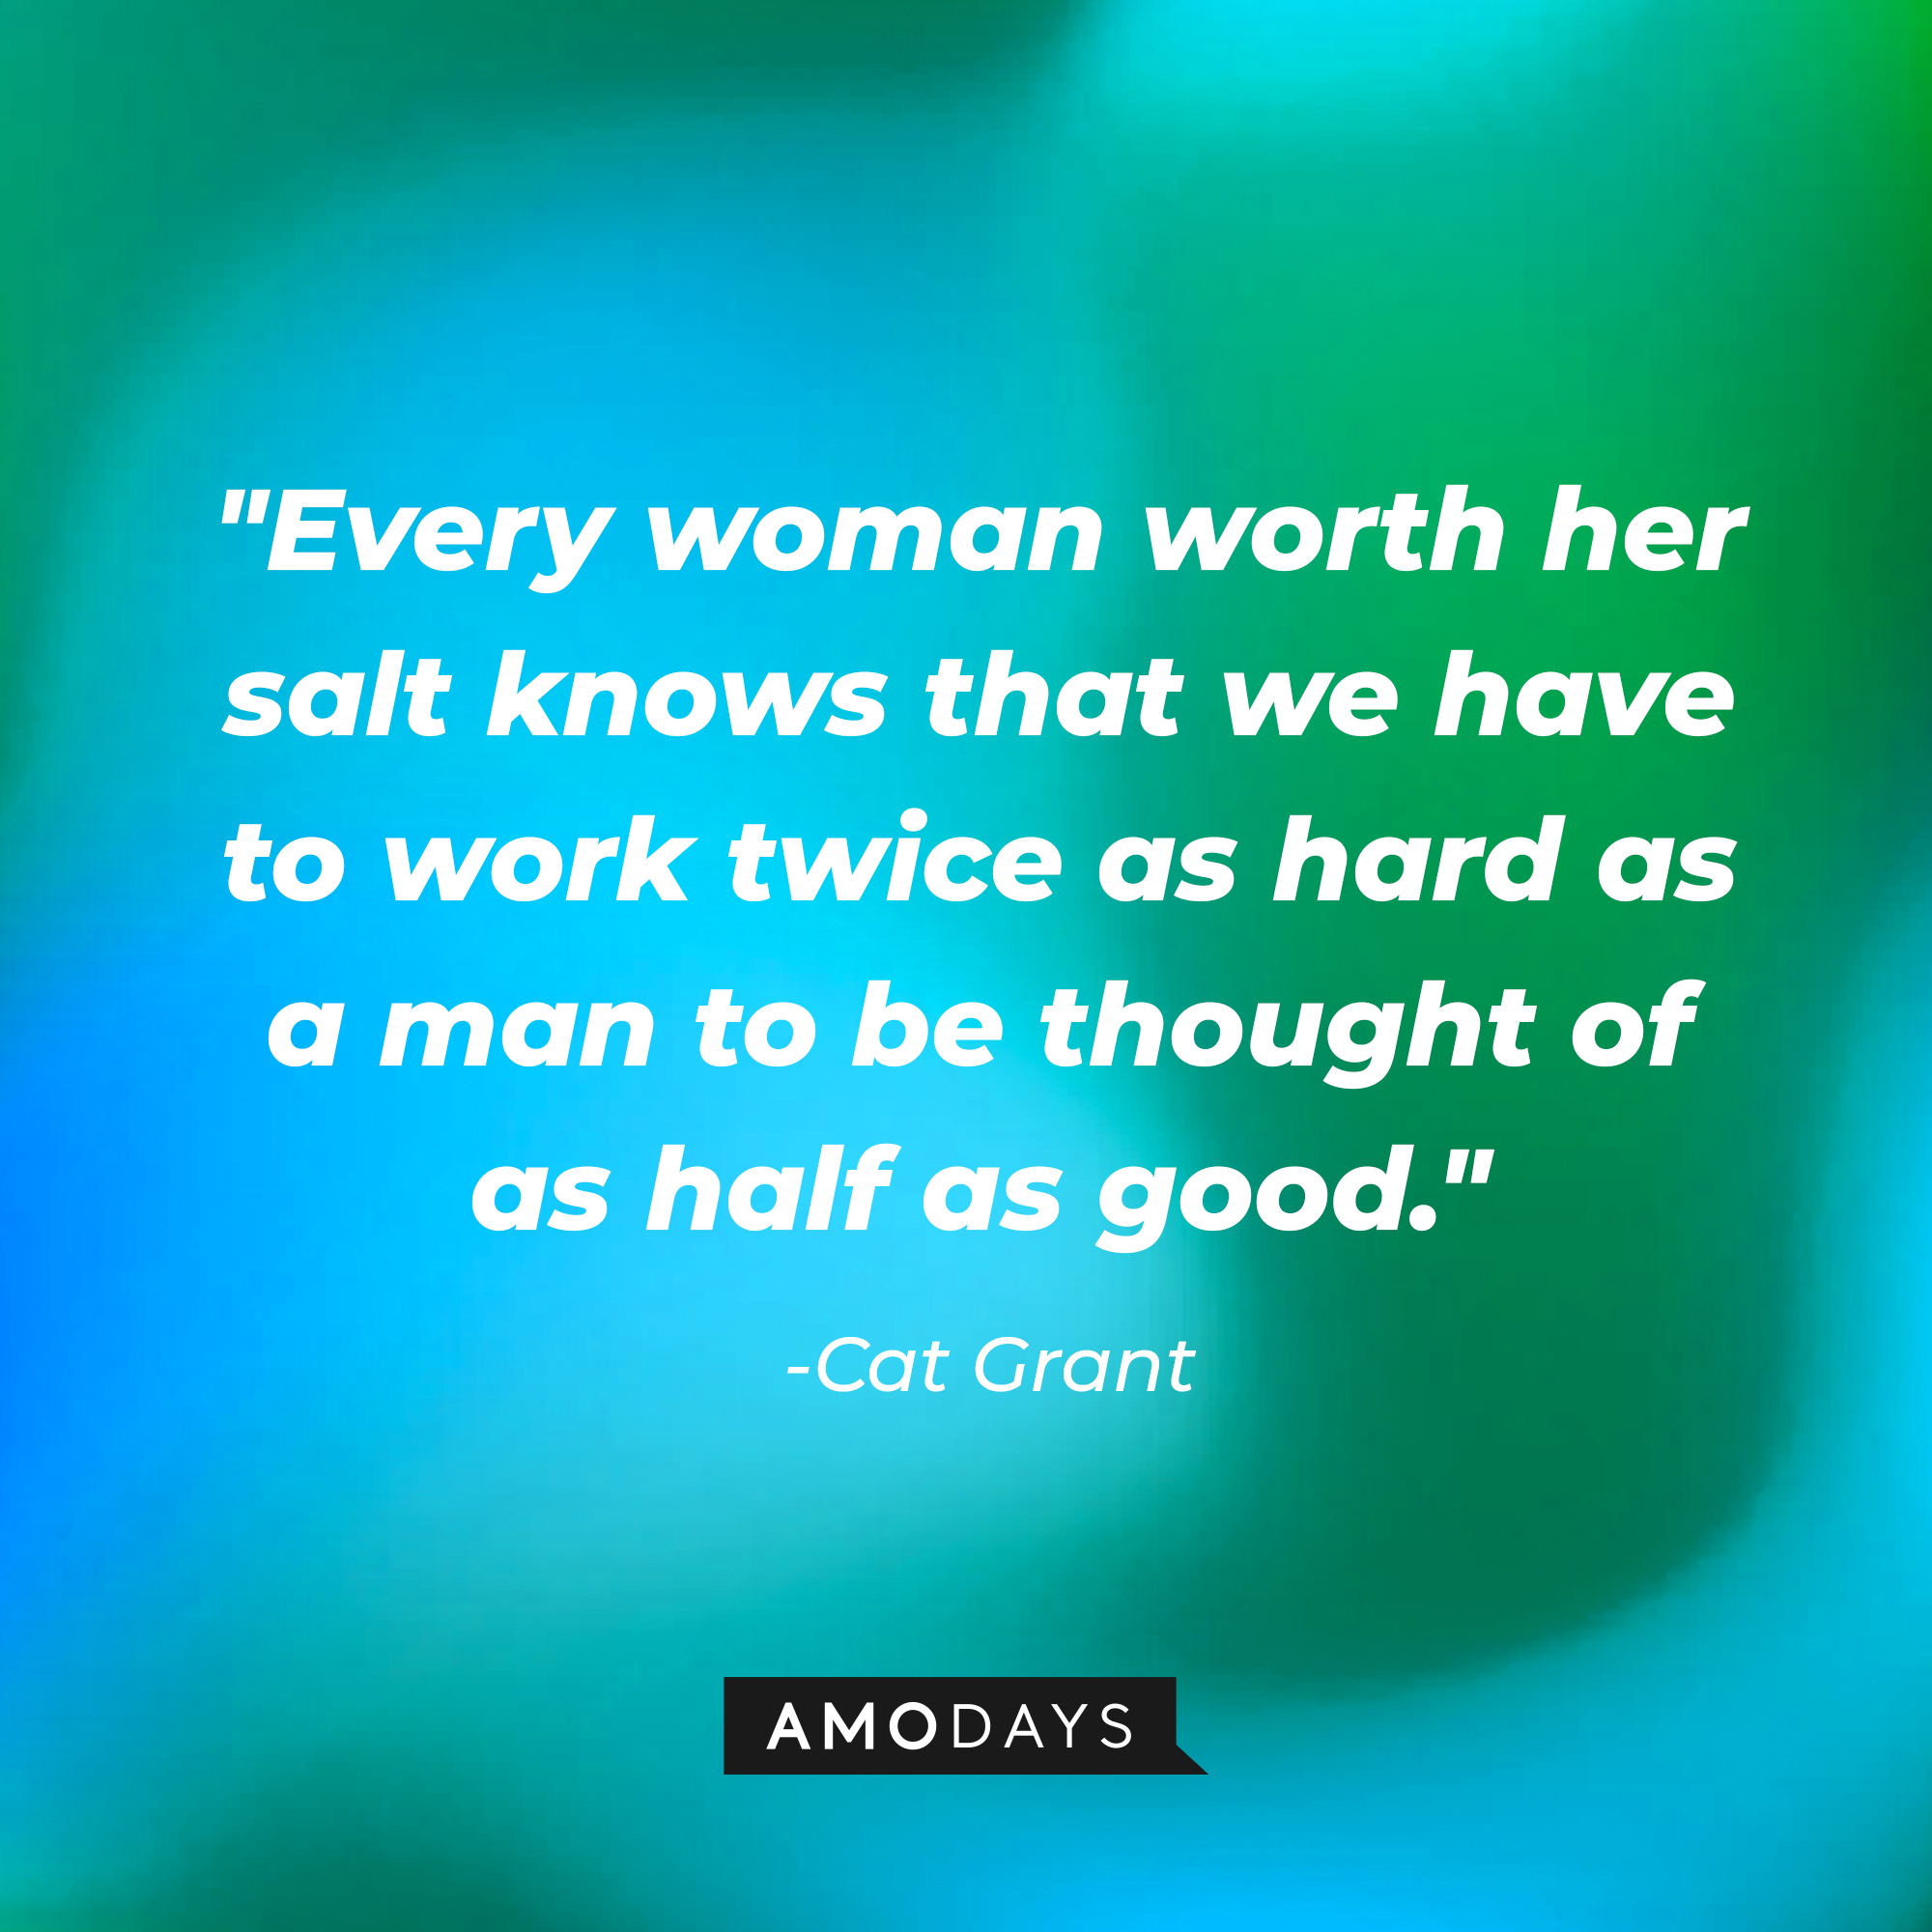 Cat Grant's quote: "Every woman worth her salt knows that we have to work twice as hard as a man to be thought of as half as good." | Source: AmoDays